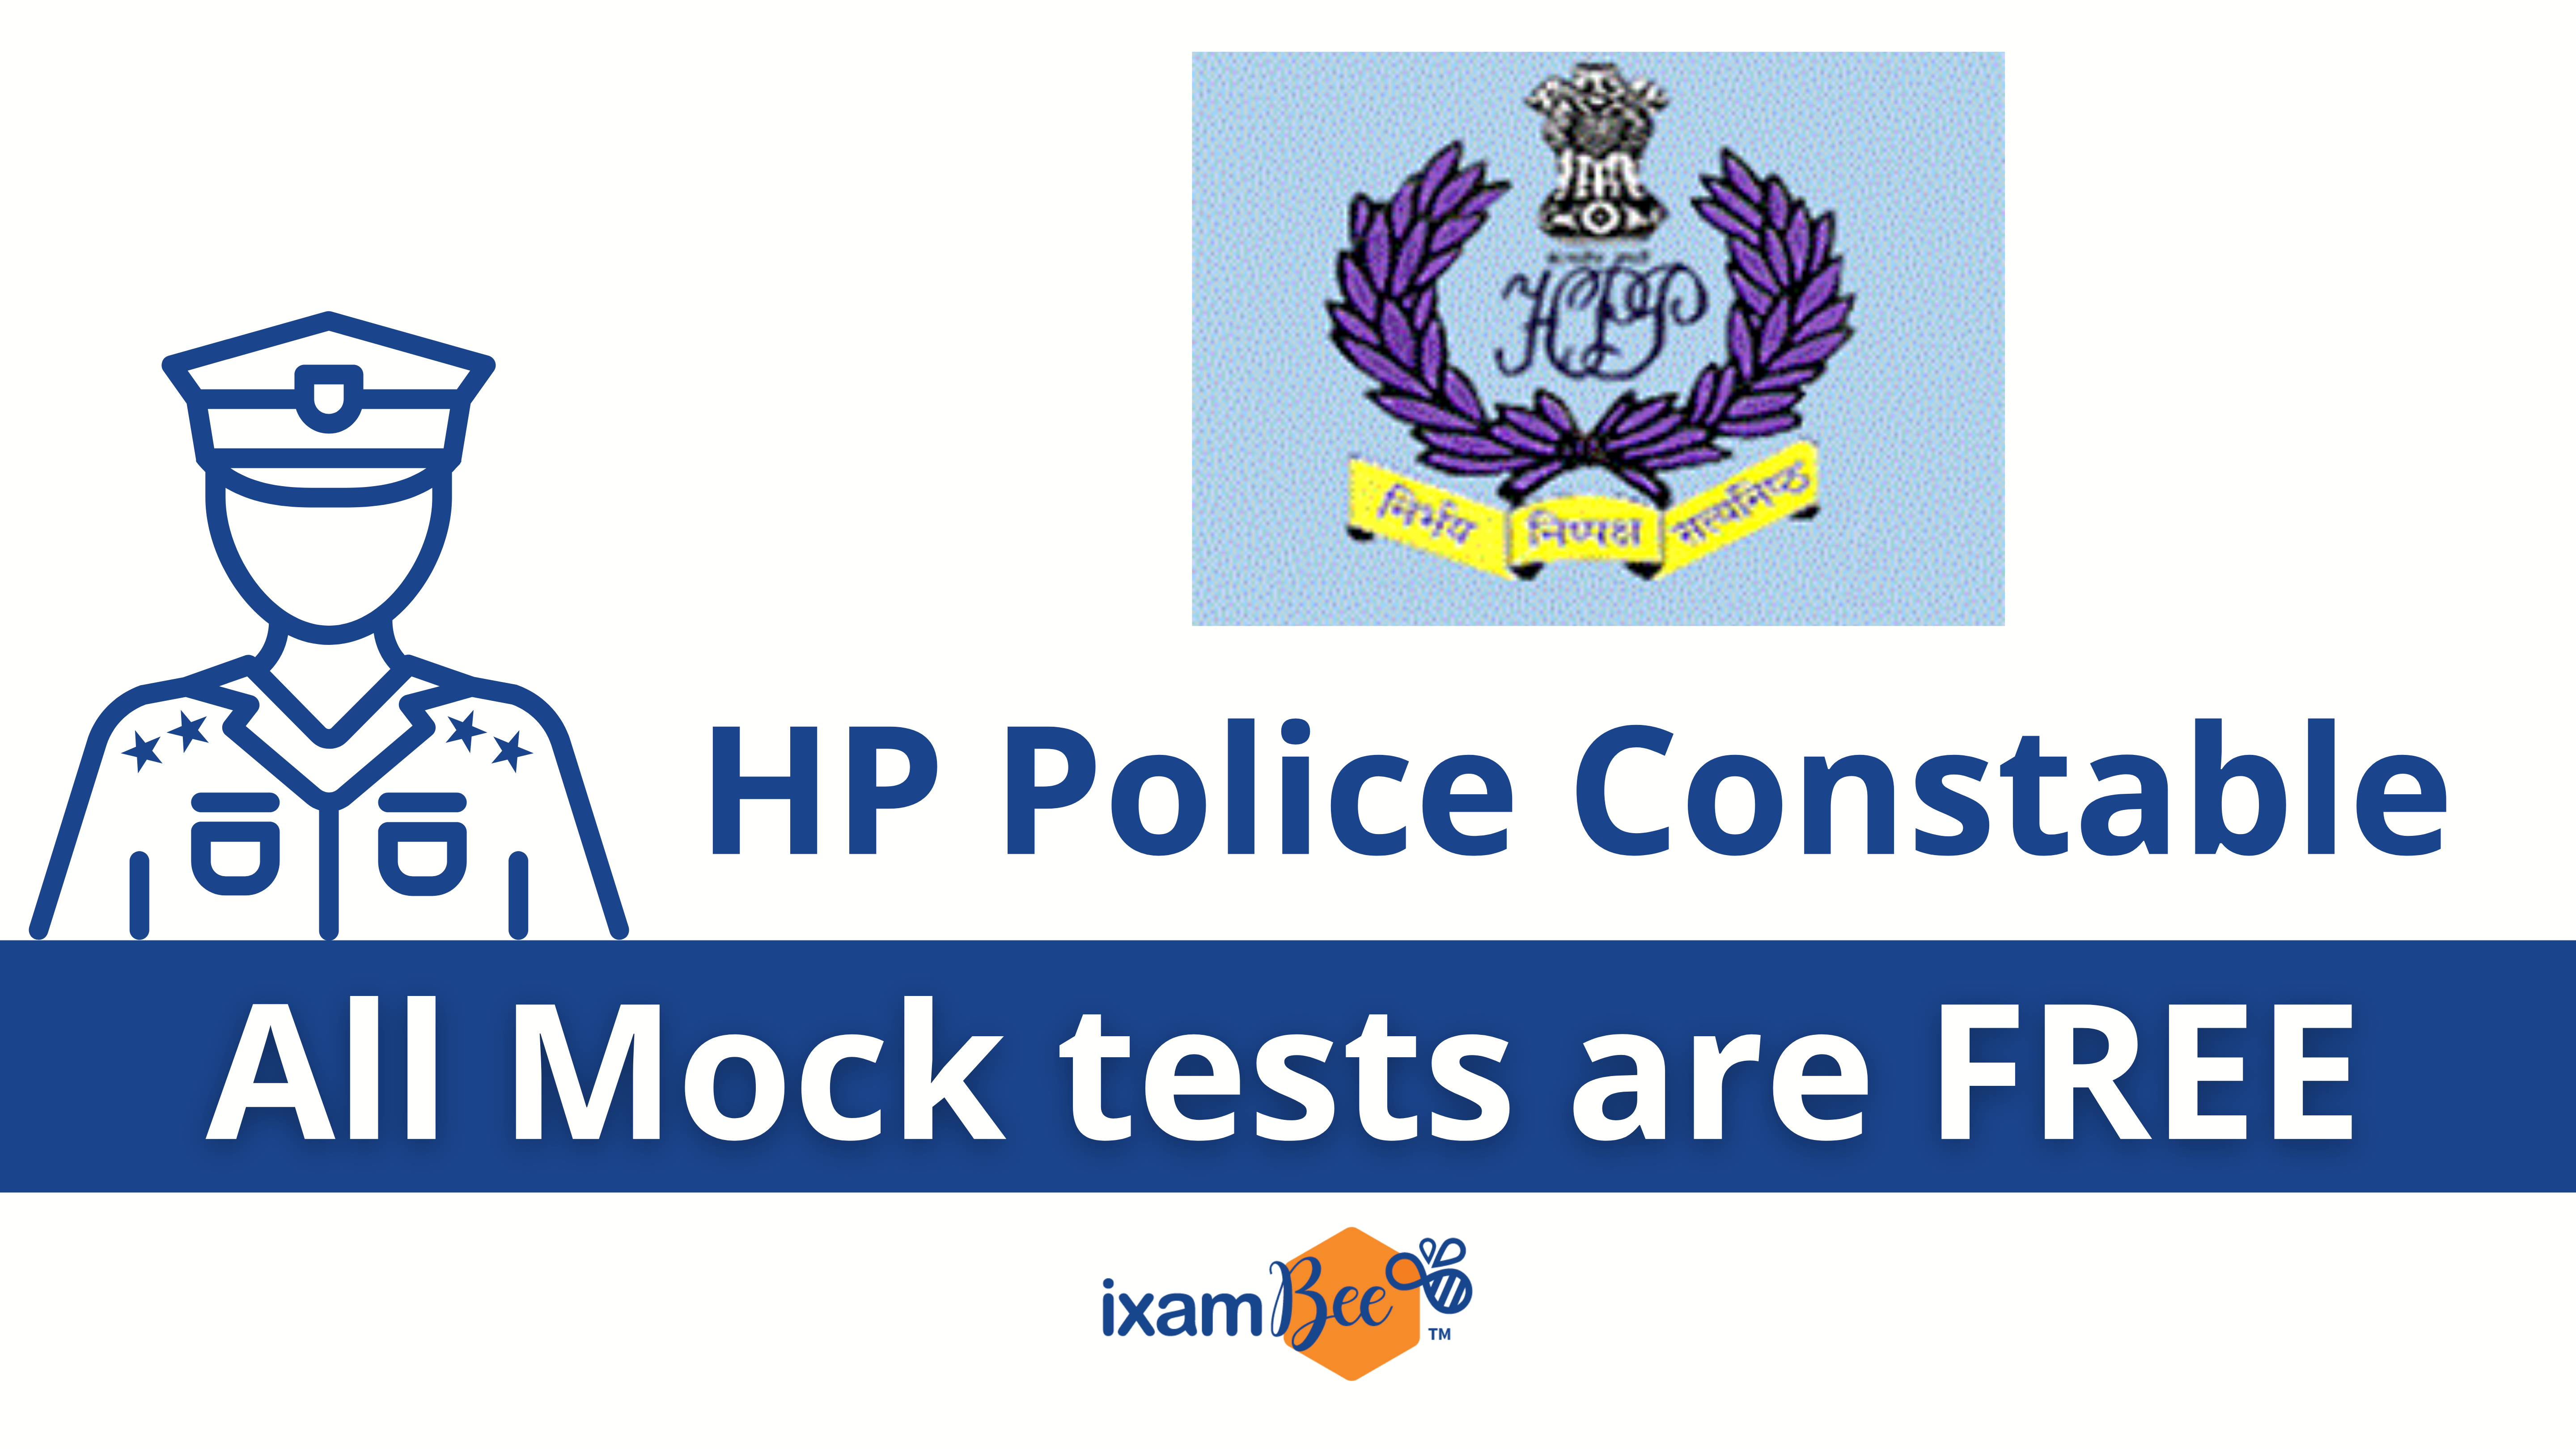 HP Police Constable Free Mock Test